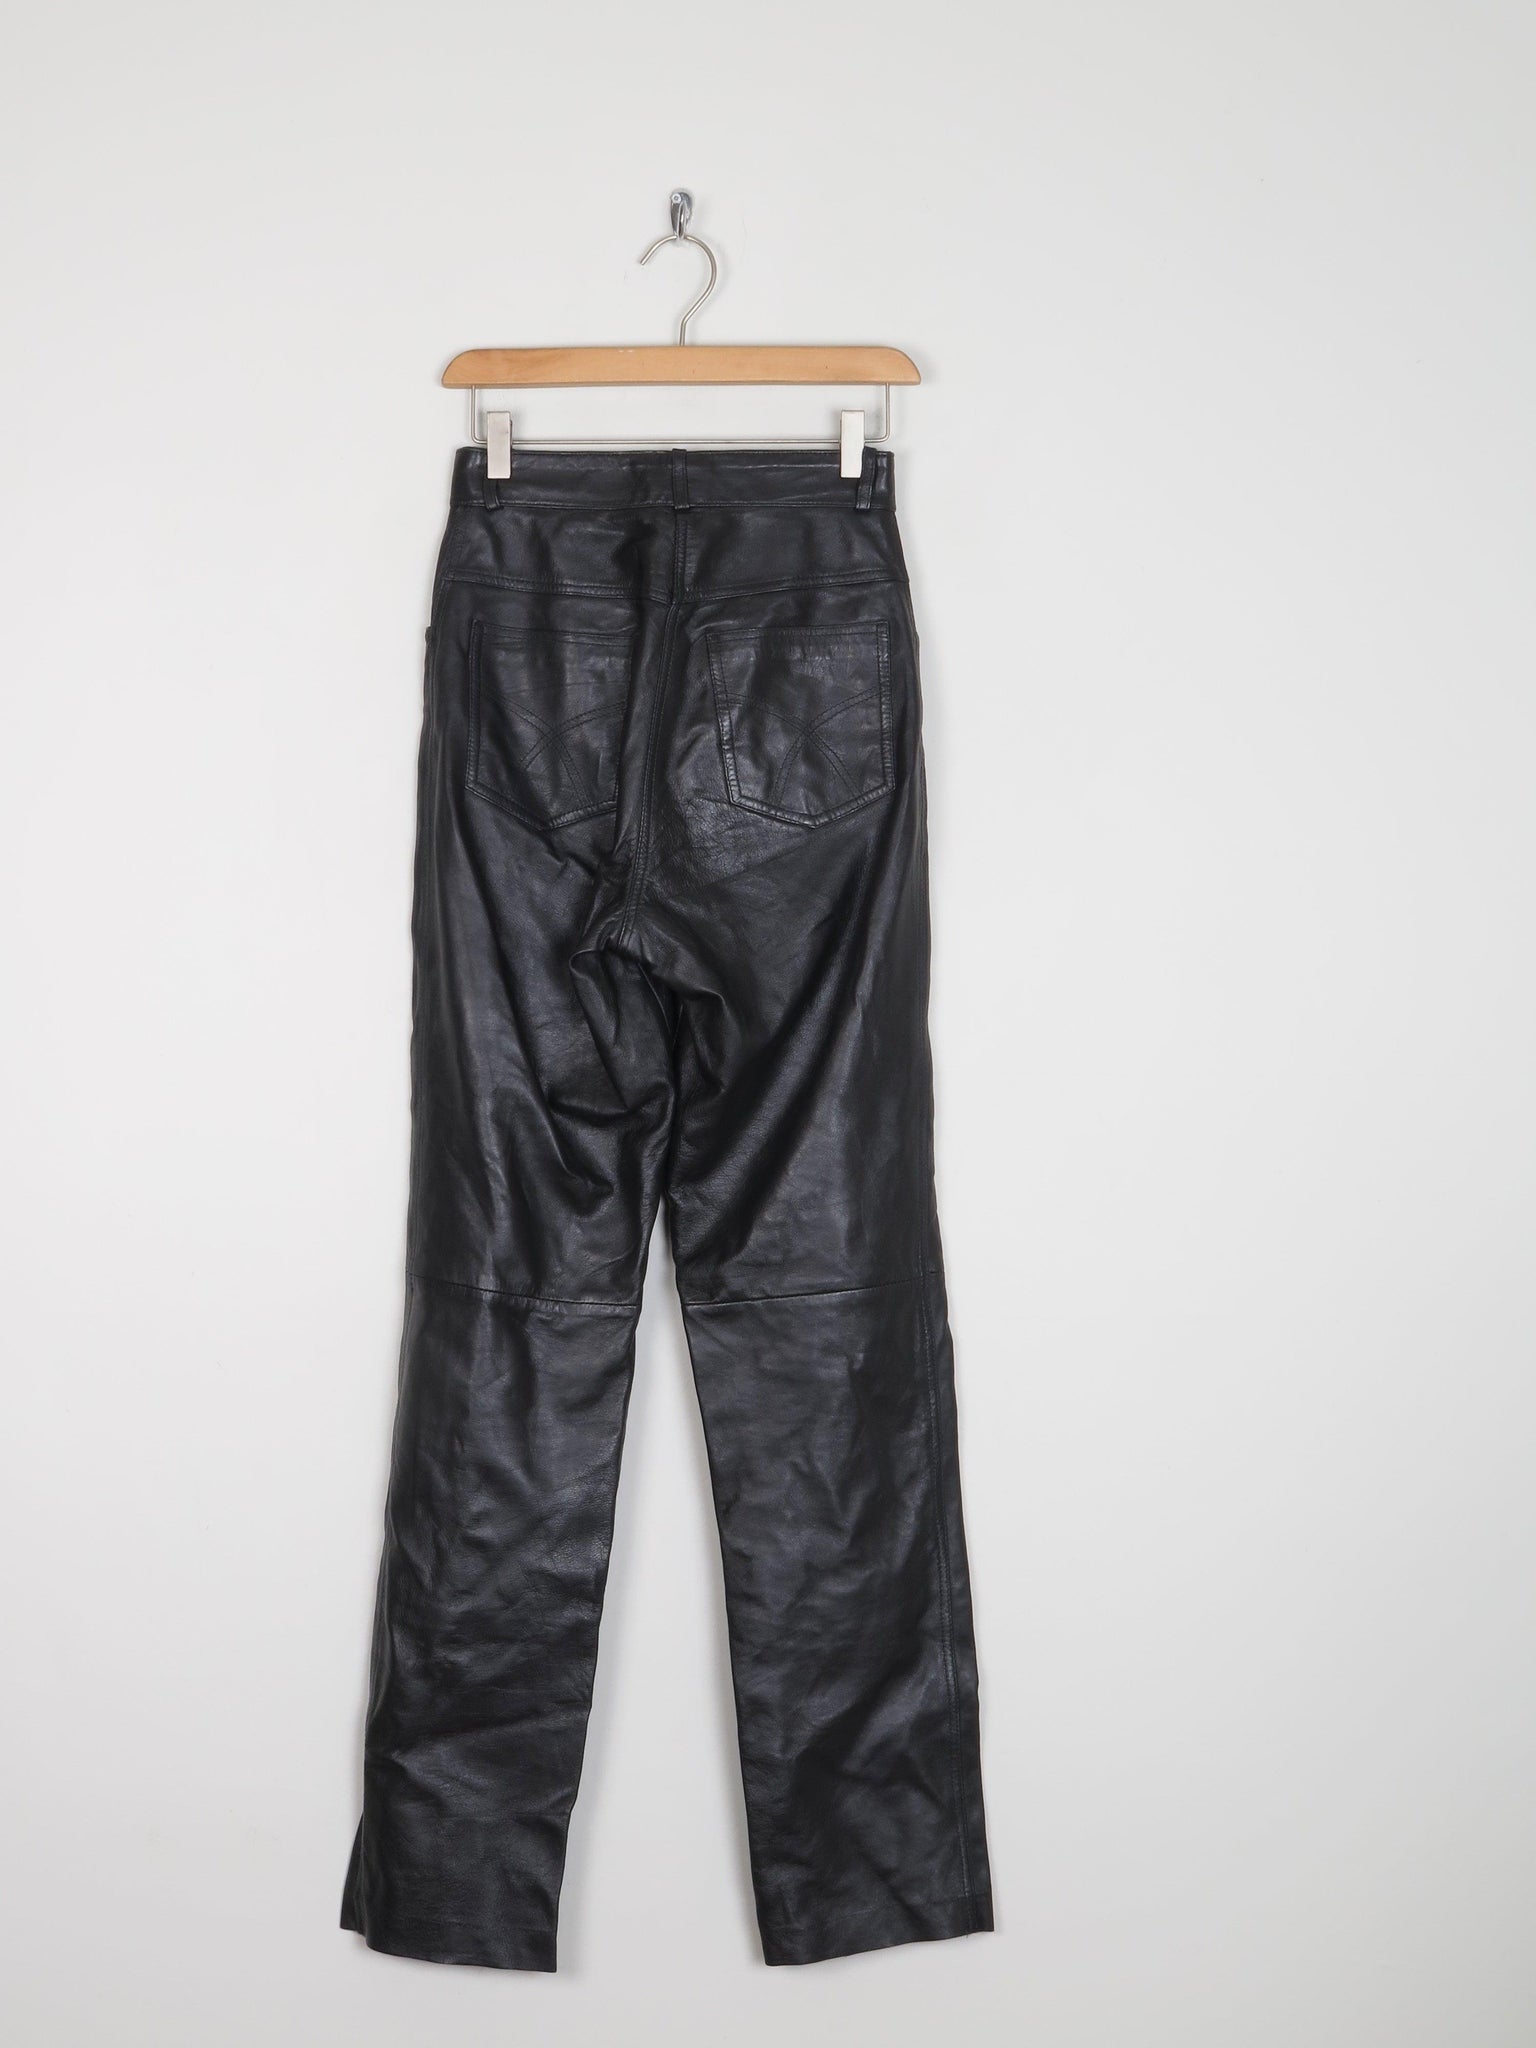 Women’s Vintage Black Leather Trousers 8 - The Harlequin